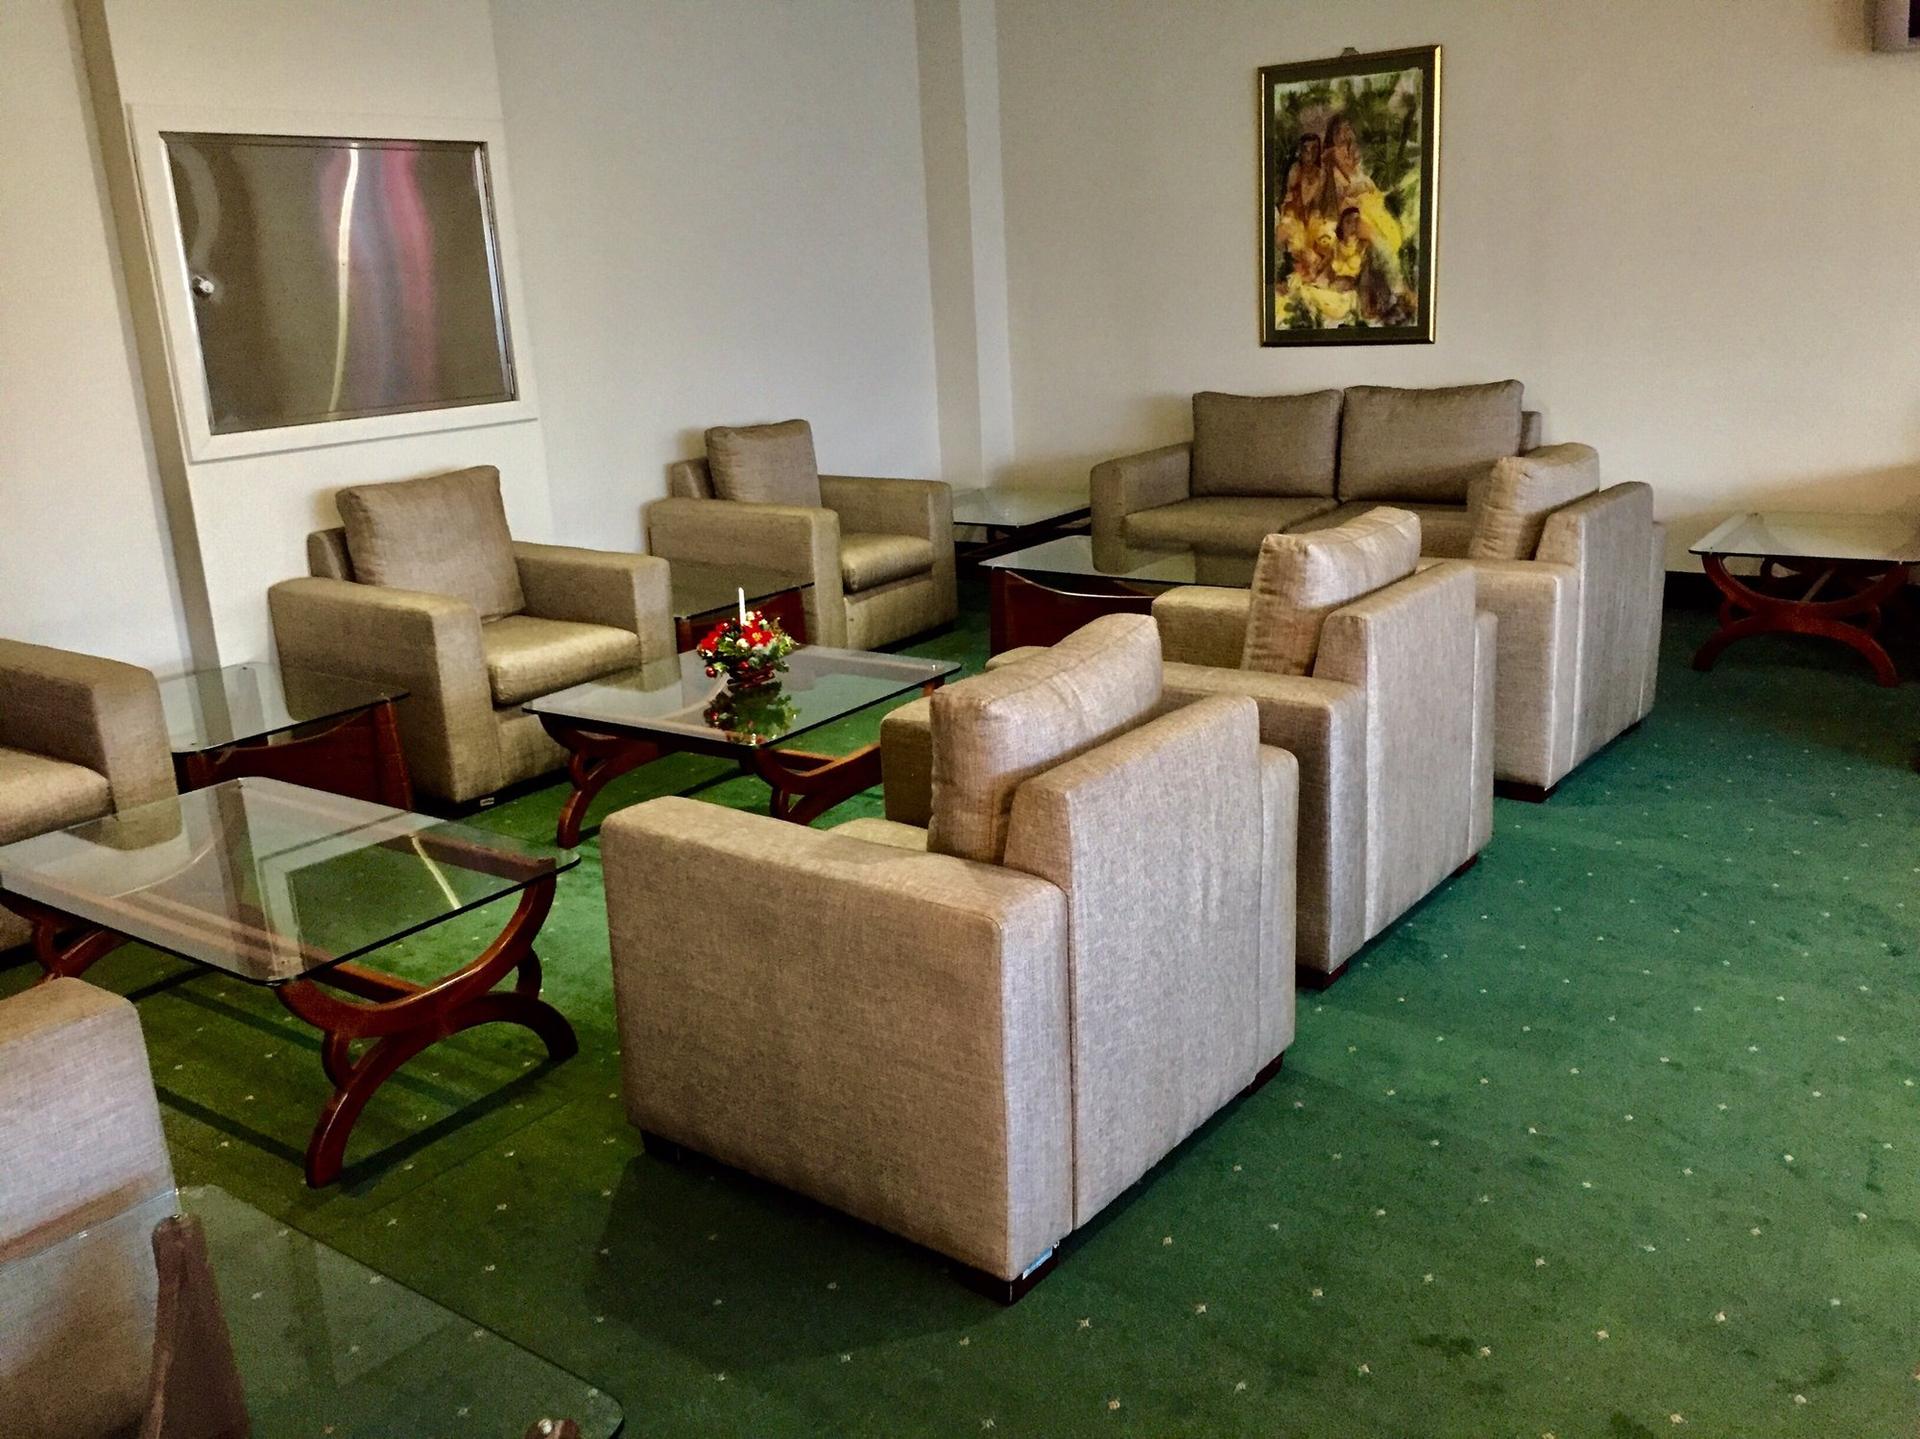 Lotus First Class Lounge image 3 of 22